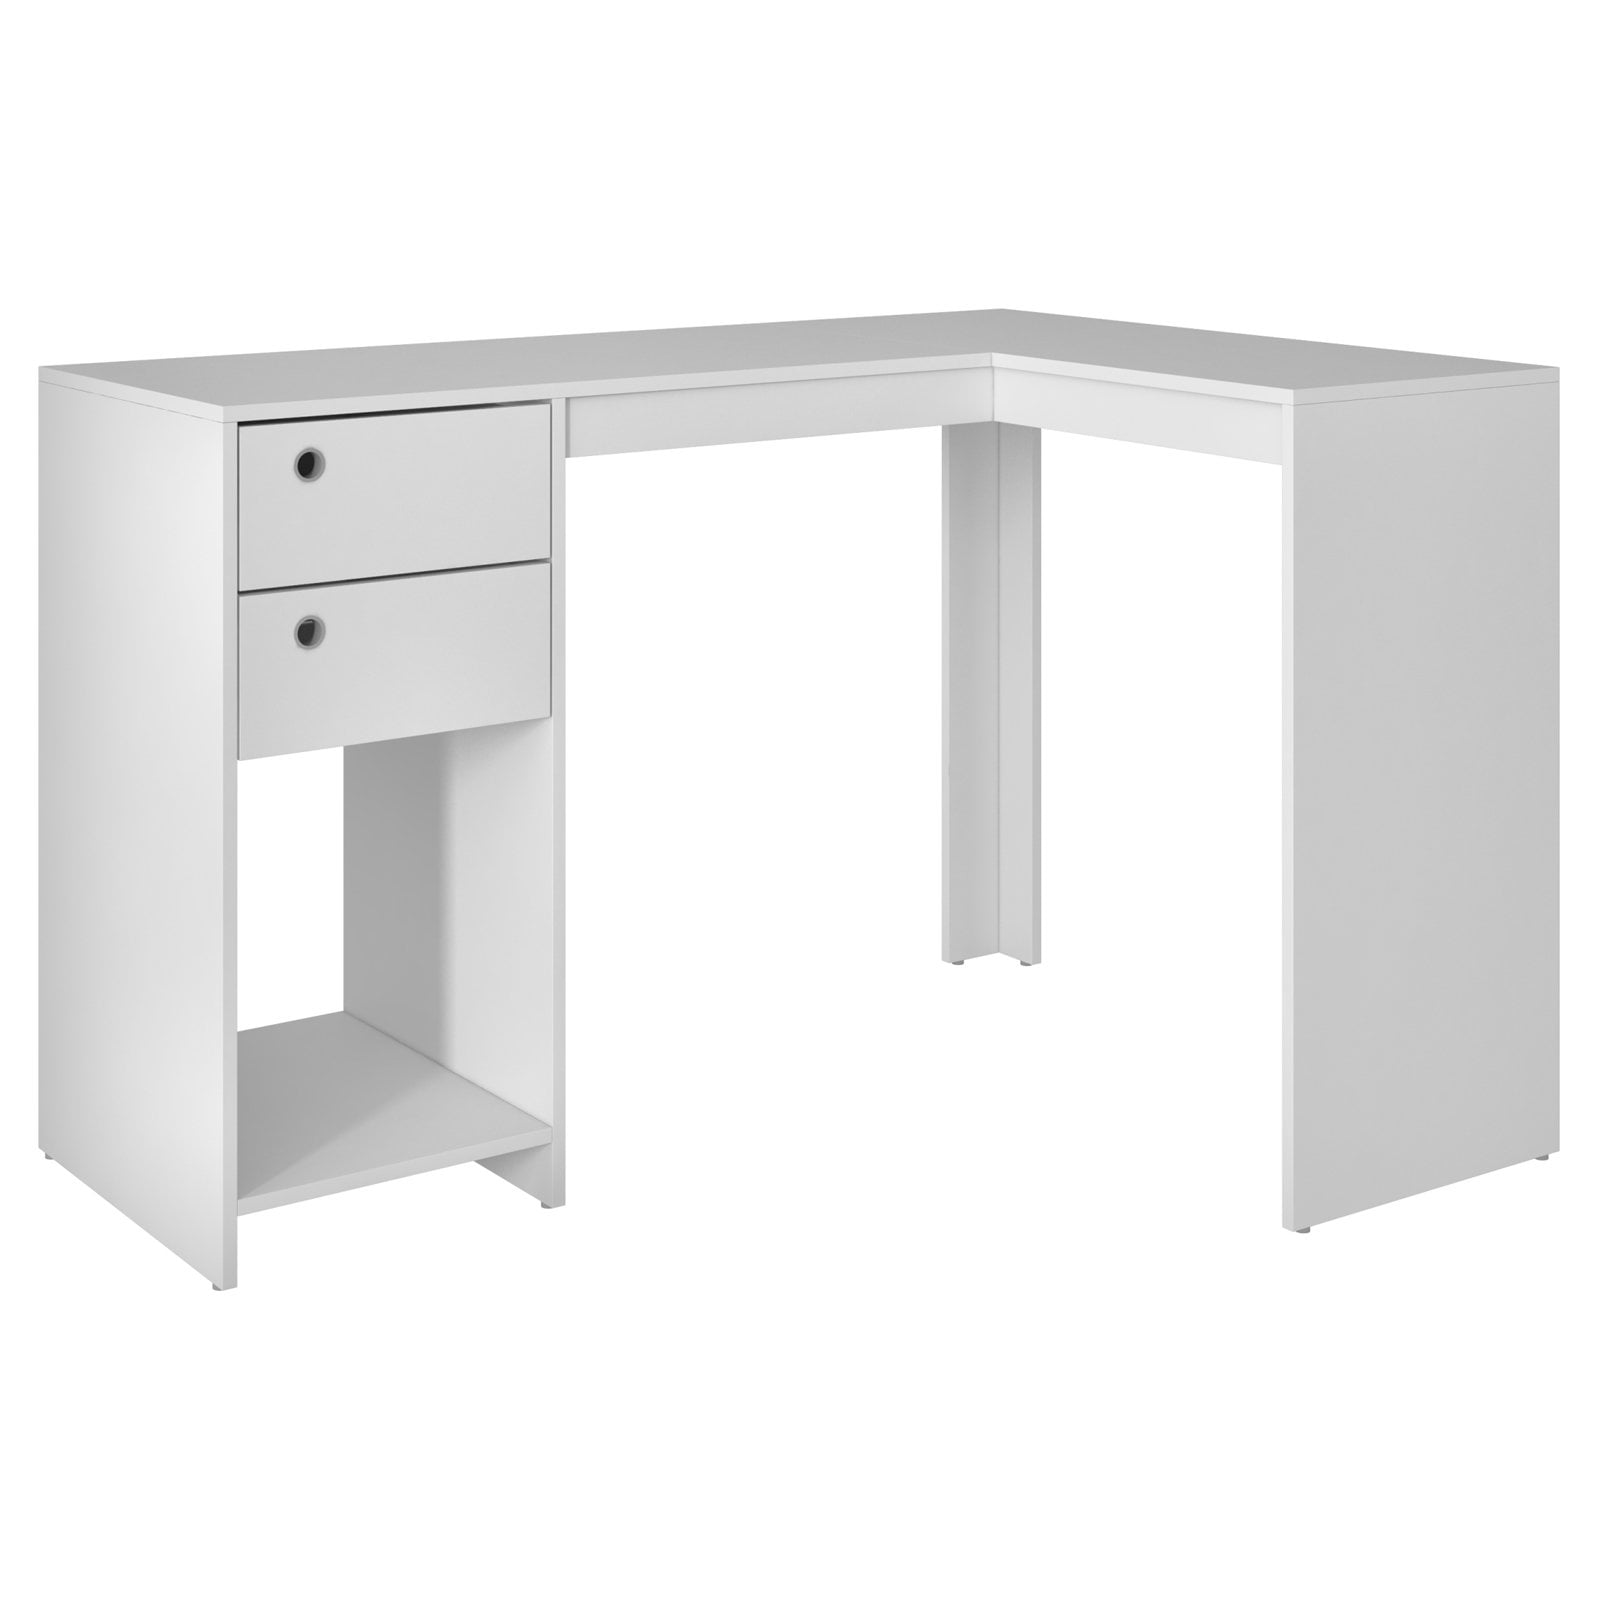 41amc6 Accentuations By Modest Palermo Classic L-shaped Desk With 2 Drawers & 1 Cubby In White